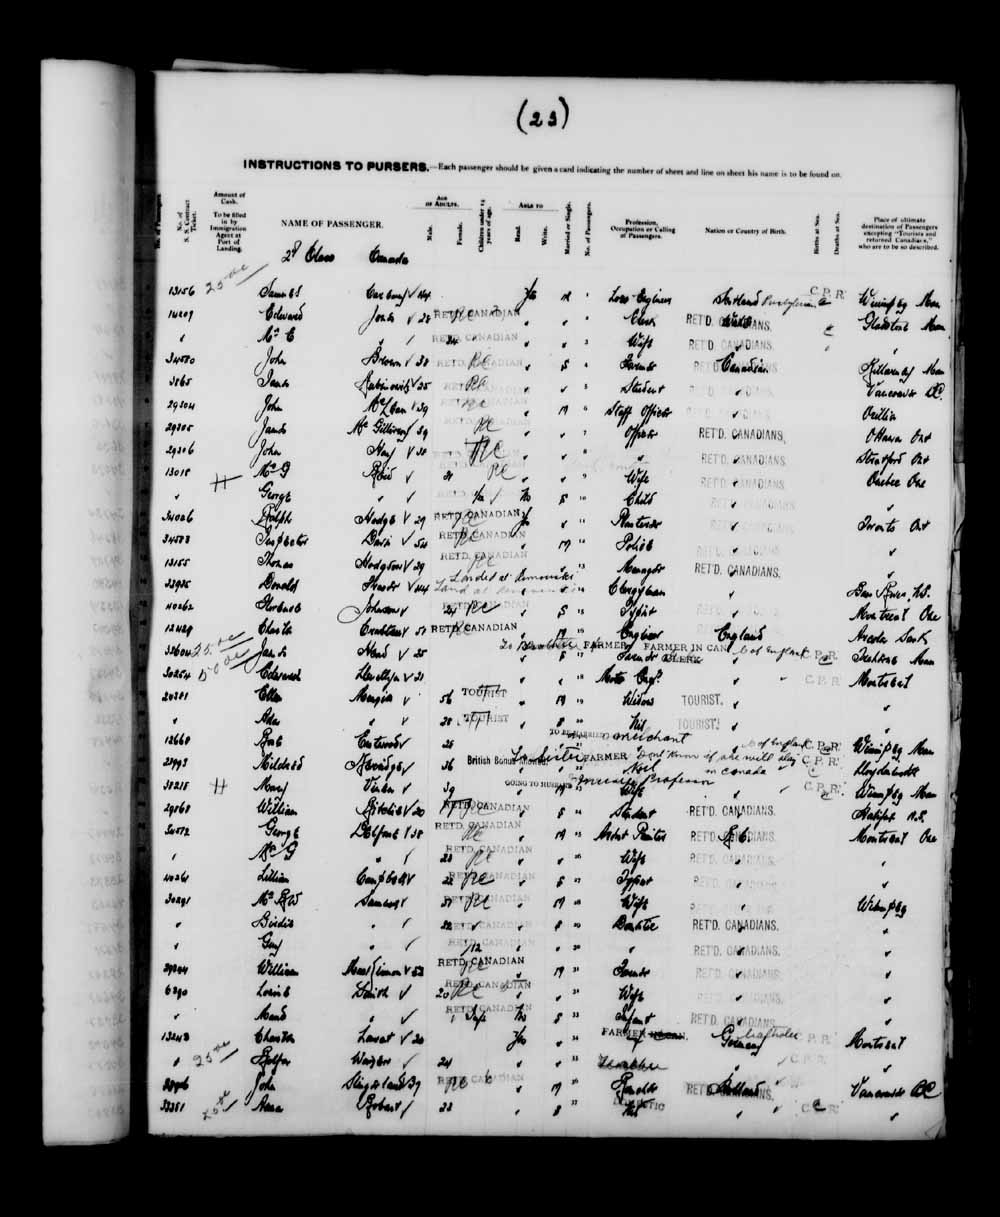 Digitized page of Quebec Passenger Lists for Image No.: e003591273